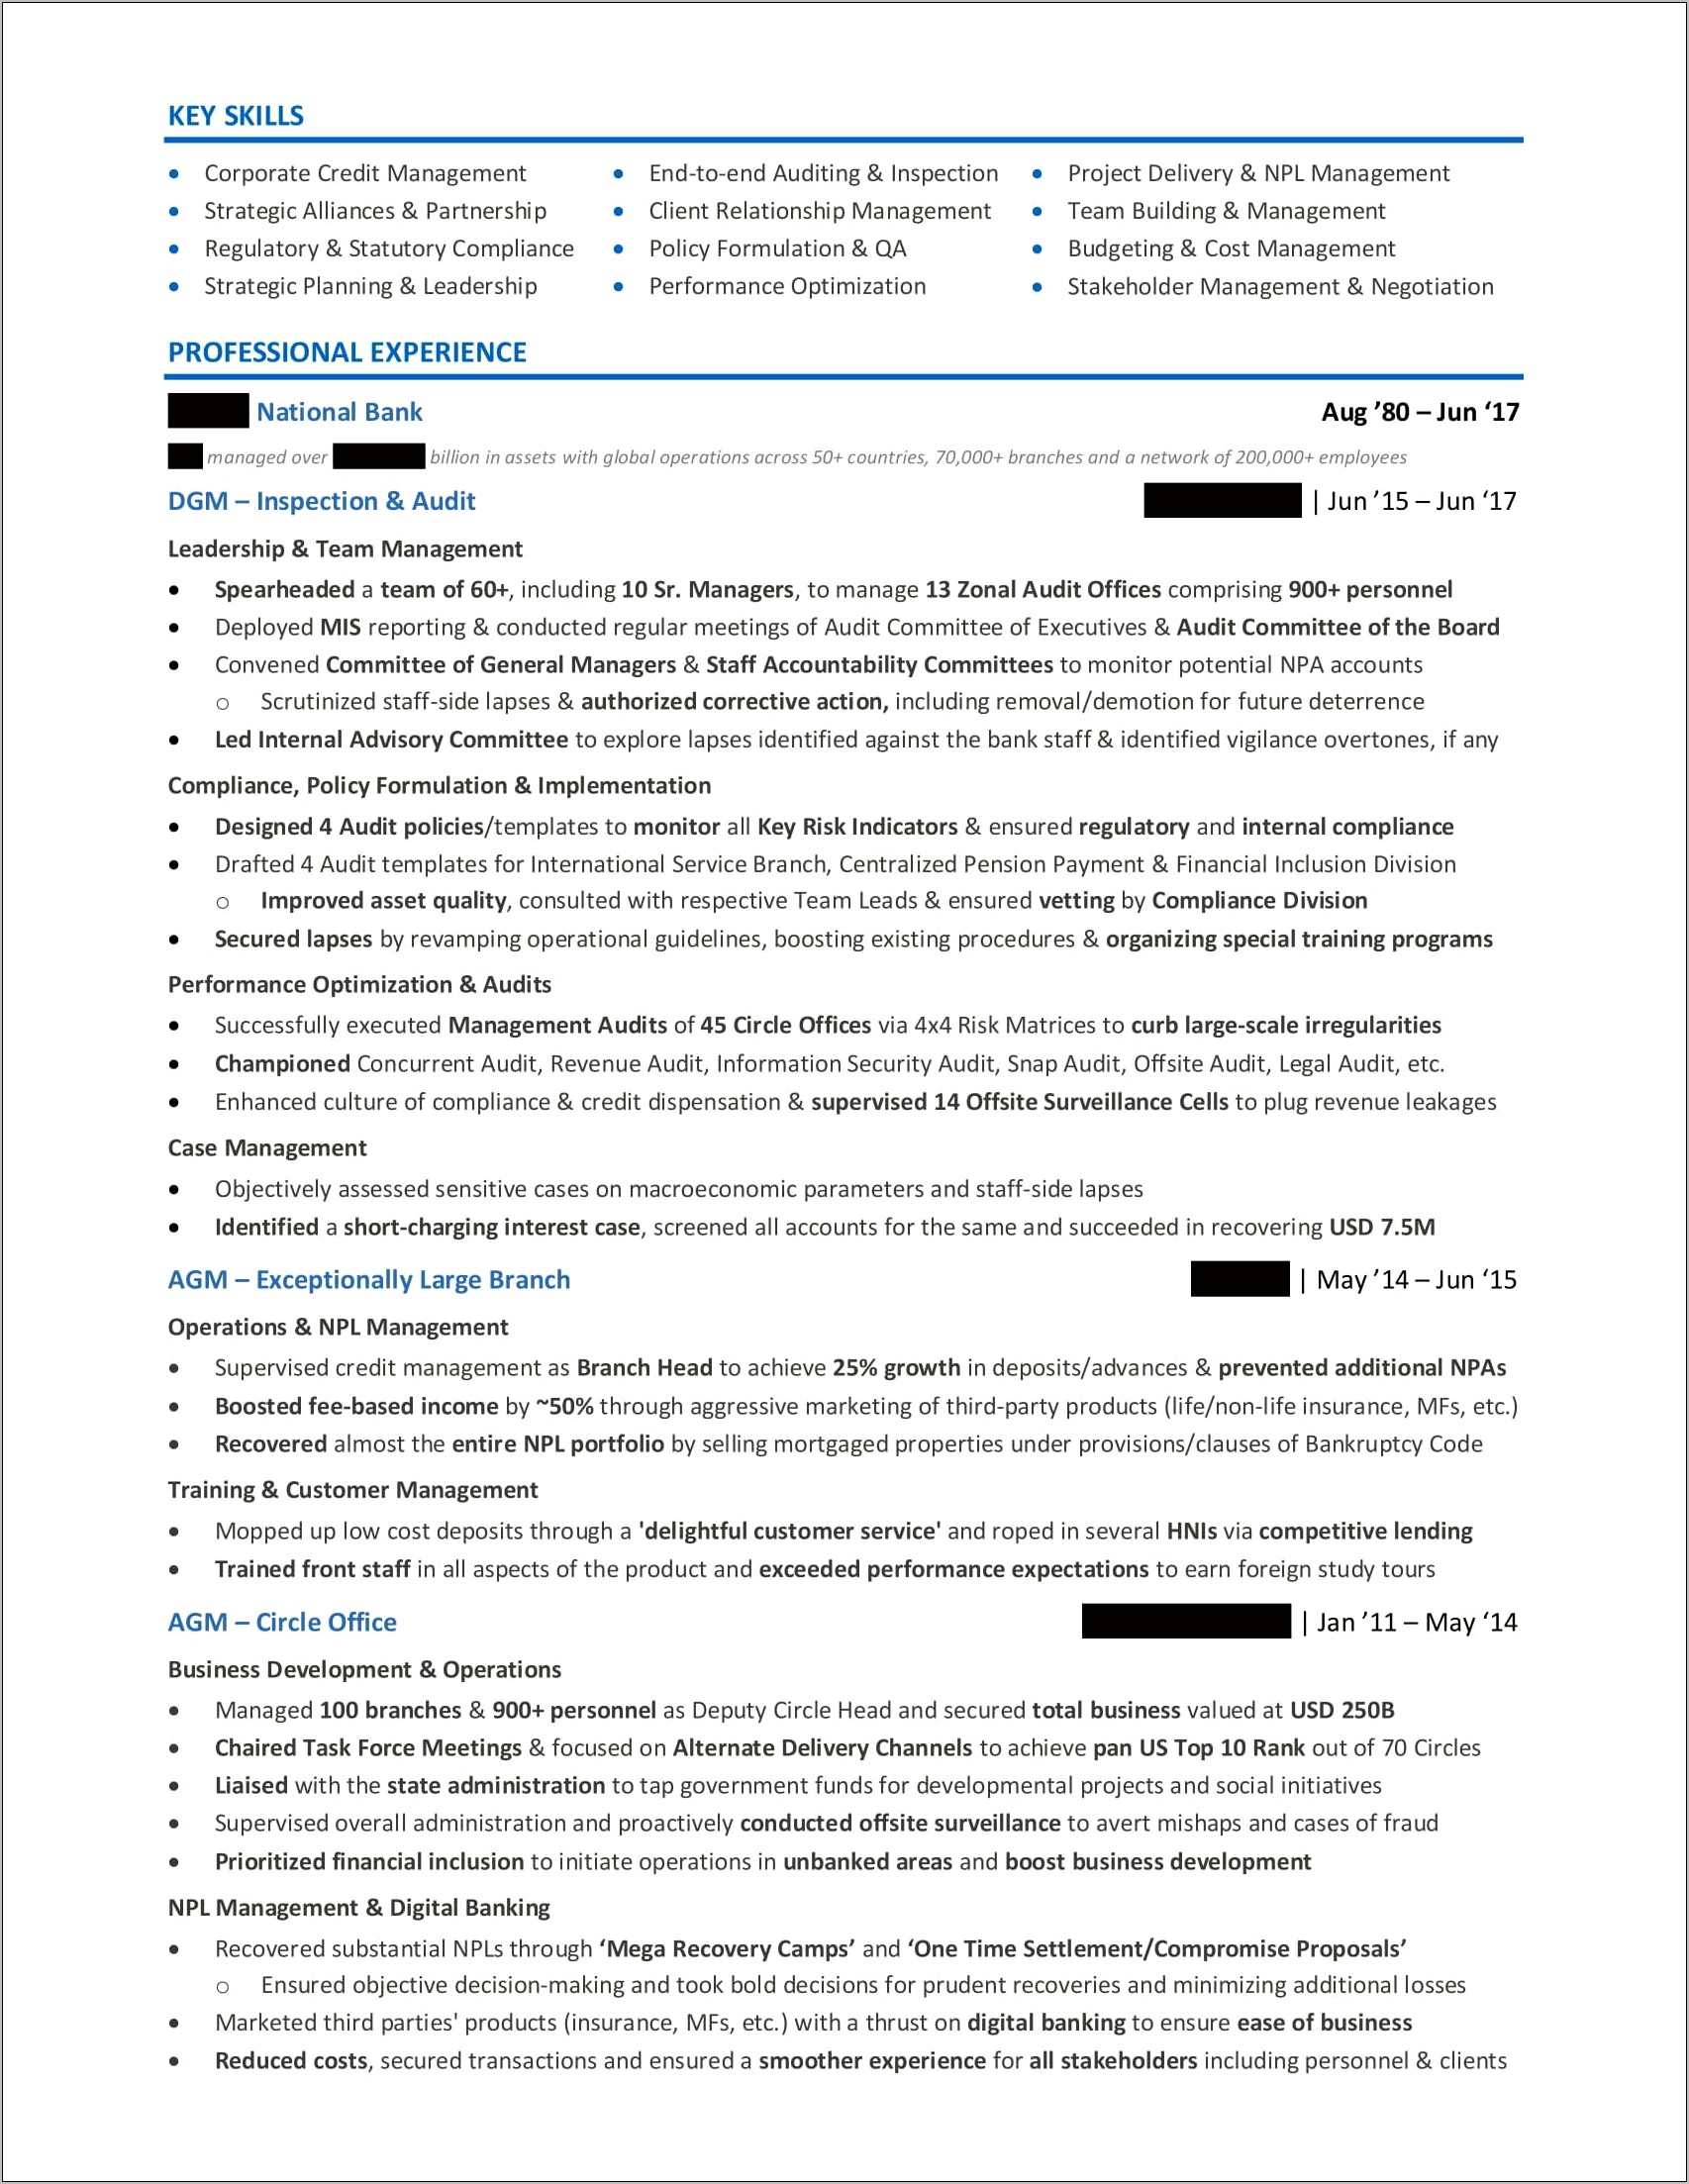 Professional Skills Section Of Resume